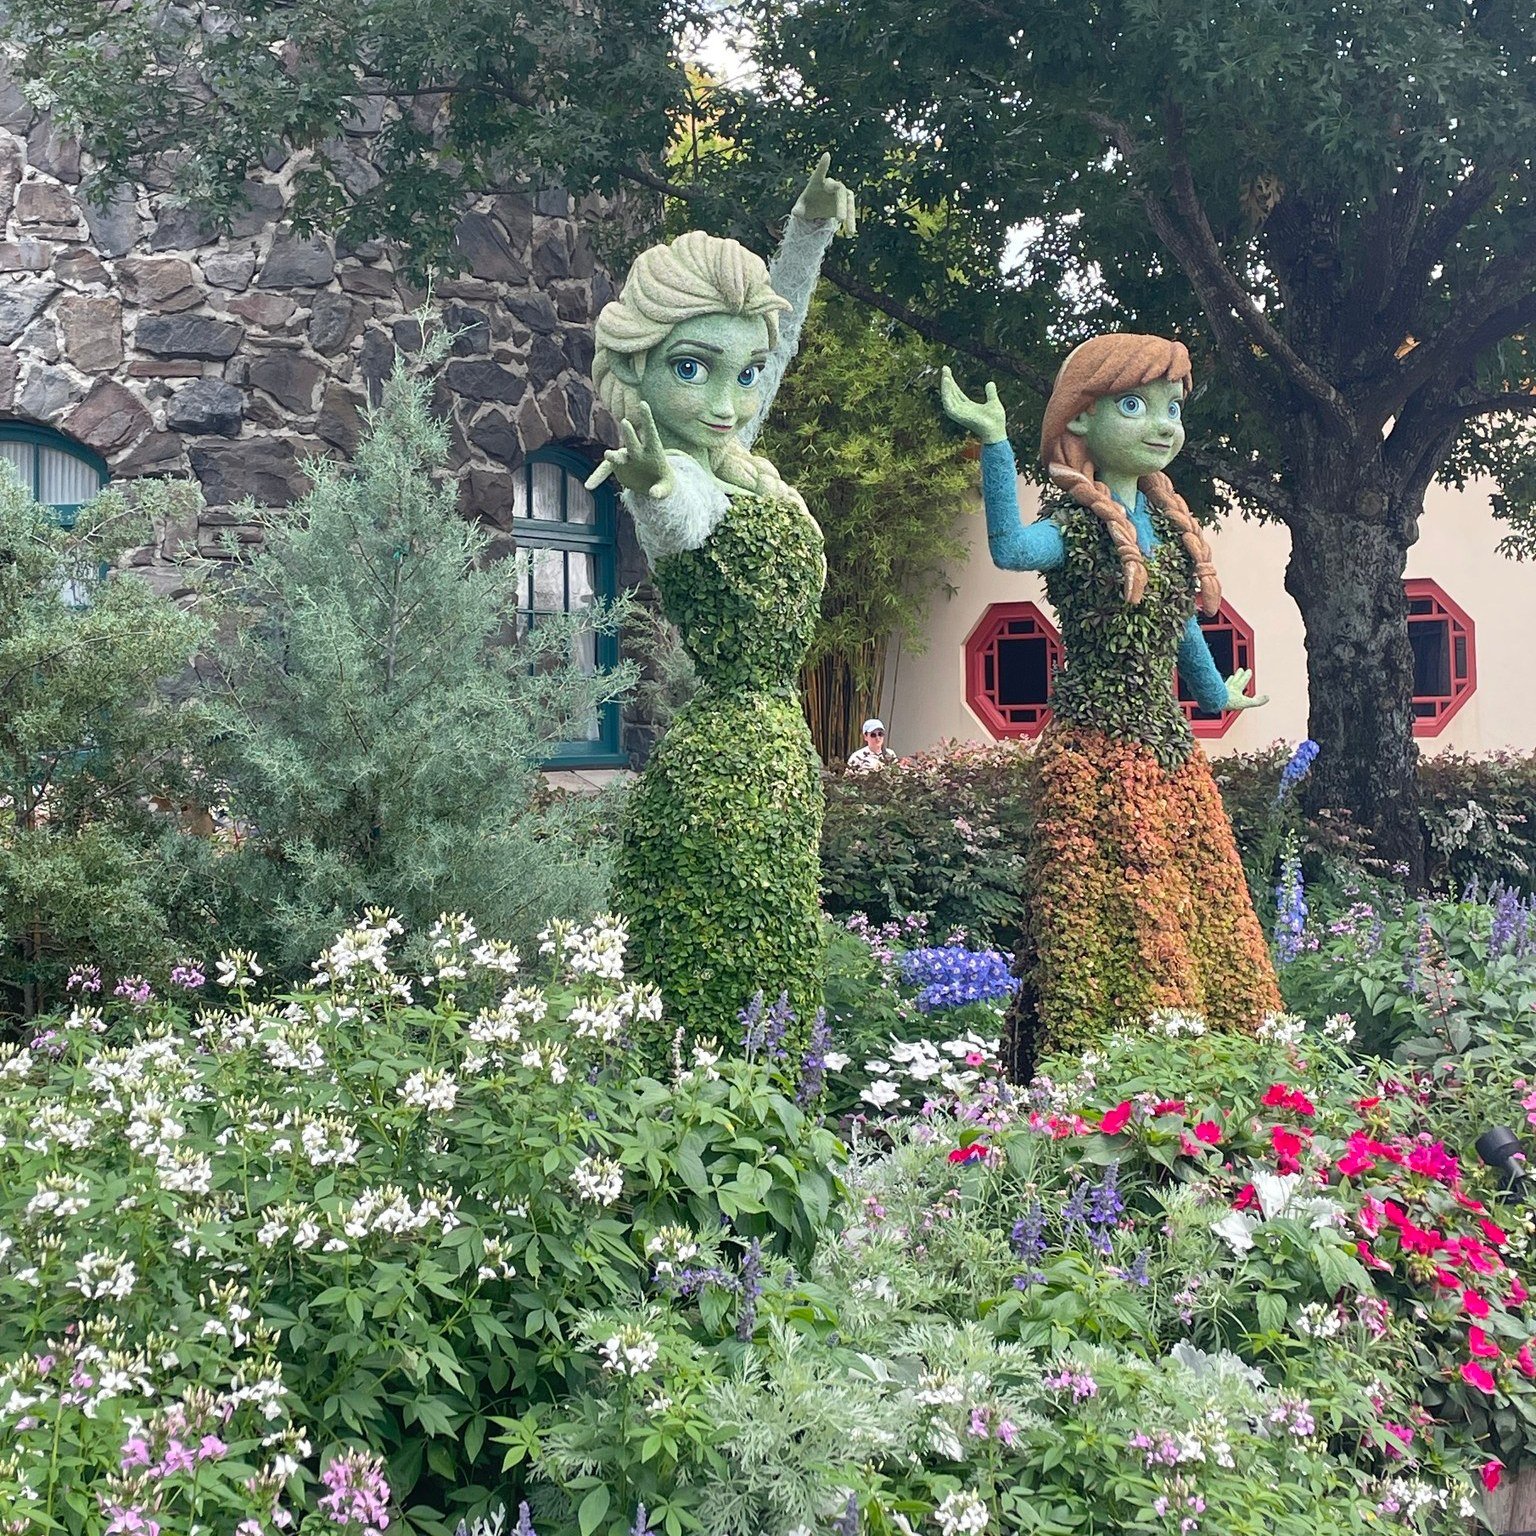 It's hard to believe that is already the last weekend of Flower and Garden Festival! 🍃🌸 This beautiful spring festival runs through Monday May 27th, so you still have a couple of days left to enjoy Epcot at its prettiest. 🌼🌷

For the first time i